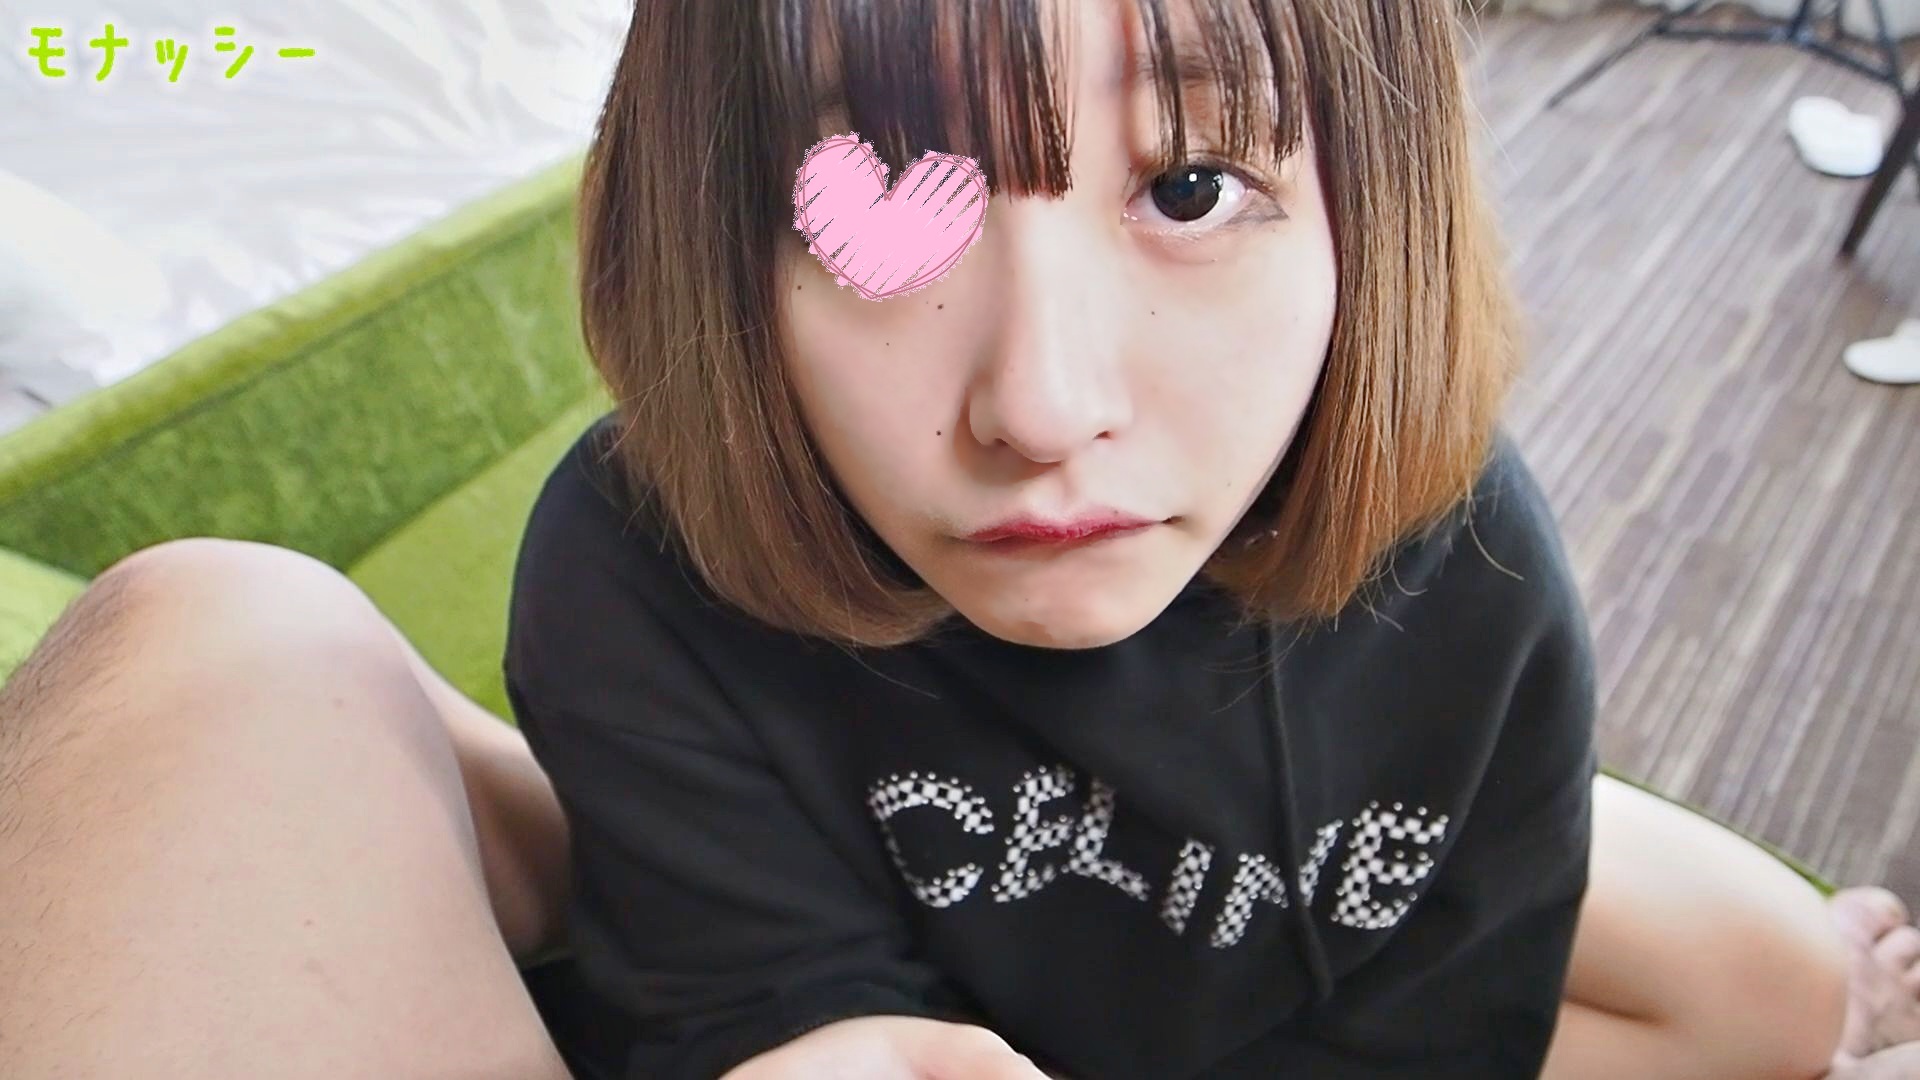 There is one extra video ASMR Monashi Menhera Pocha Pocha Miu-chan 19 who has had the experience of being warned by seniors and Ecchi teachers at the gymnasium for club activities during her school days re-challenge sound paco